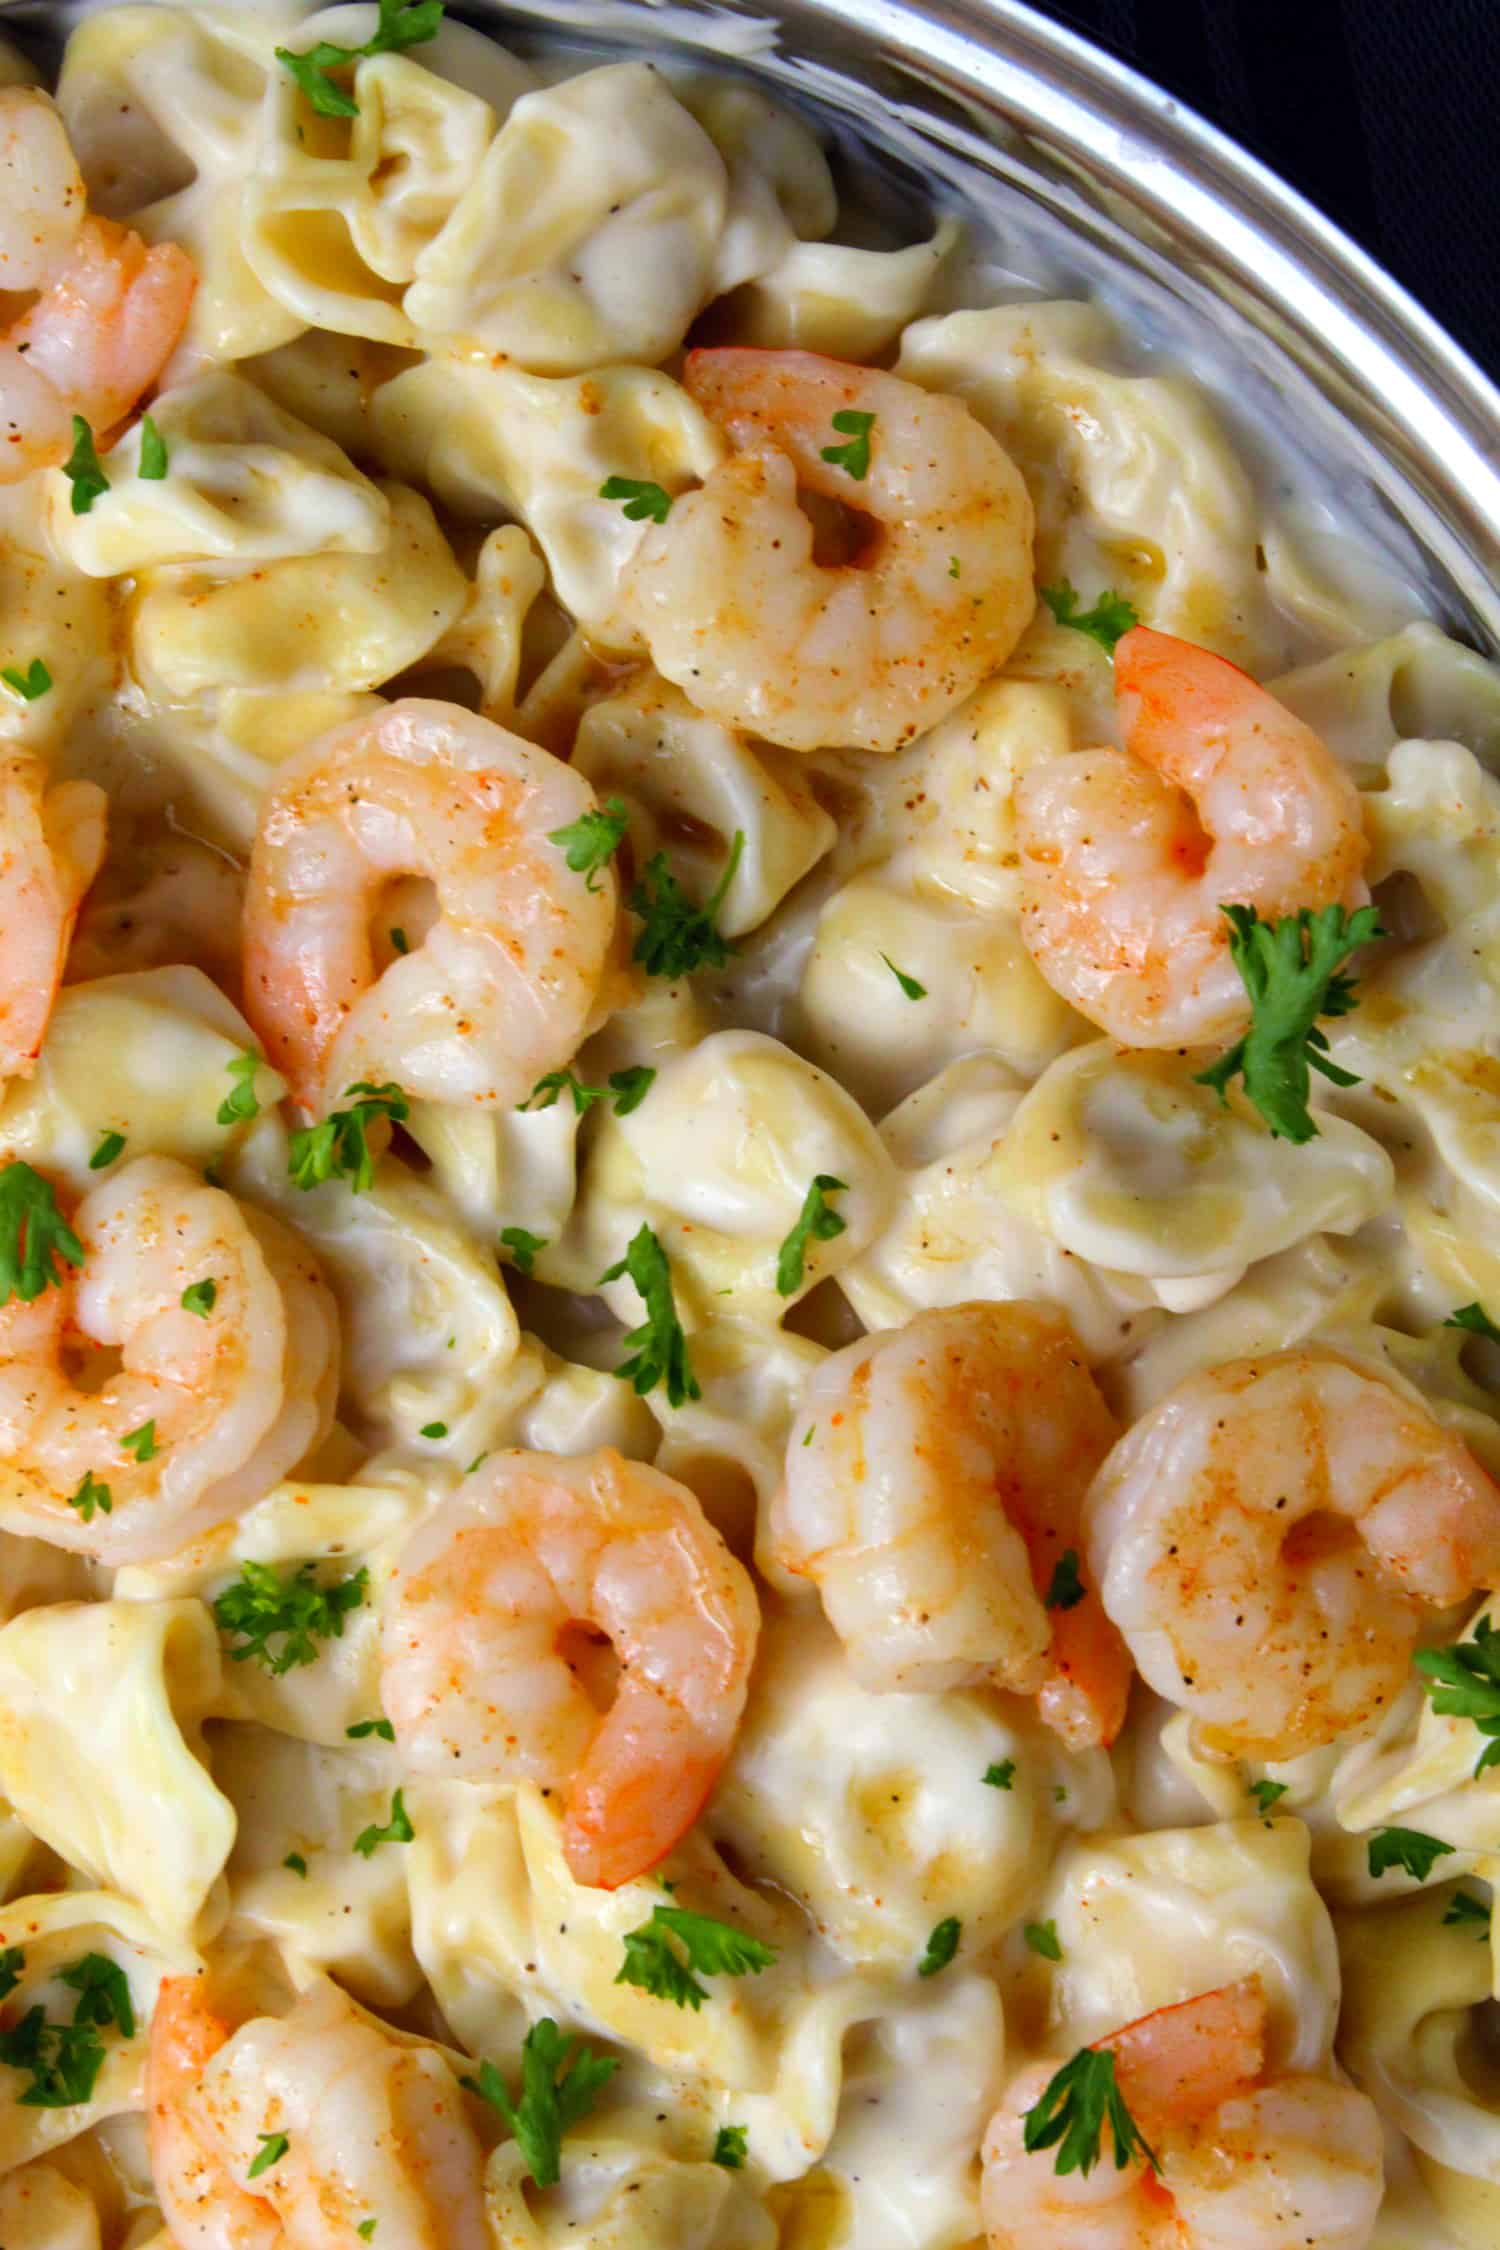 Cheese Tortellini Skillet with Shrimp